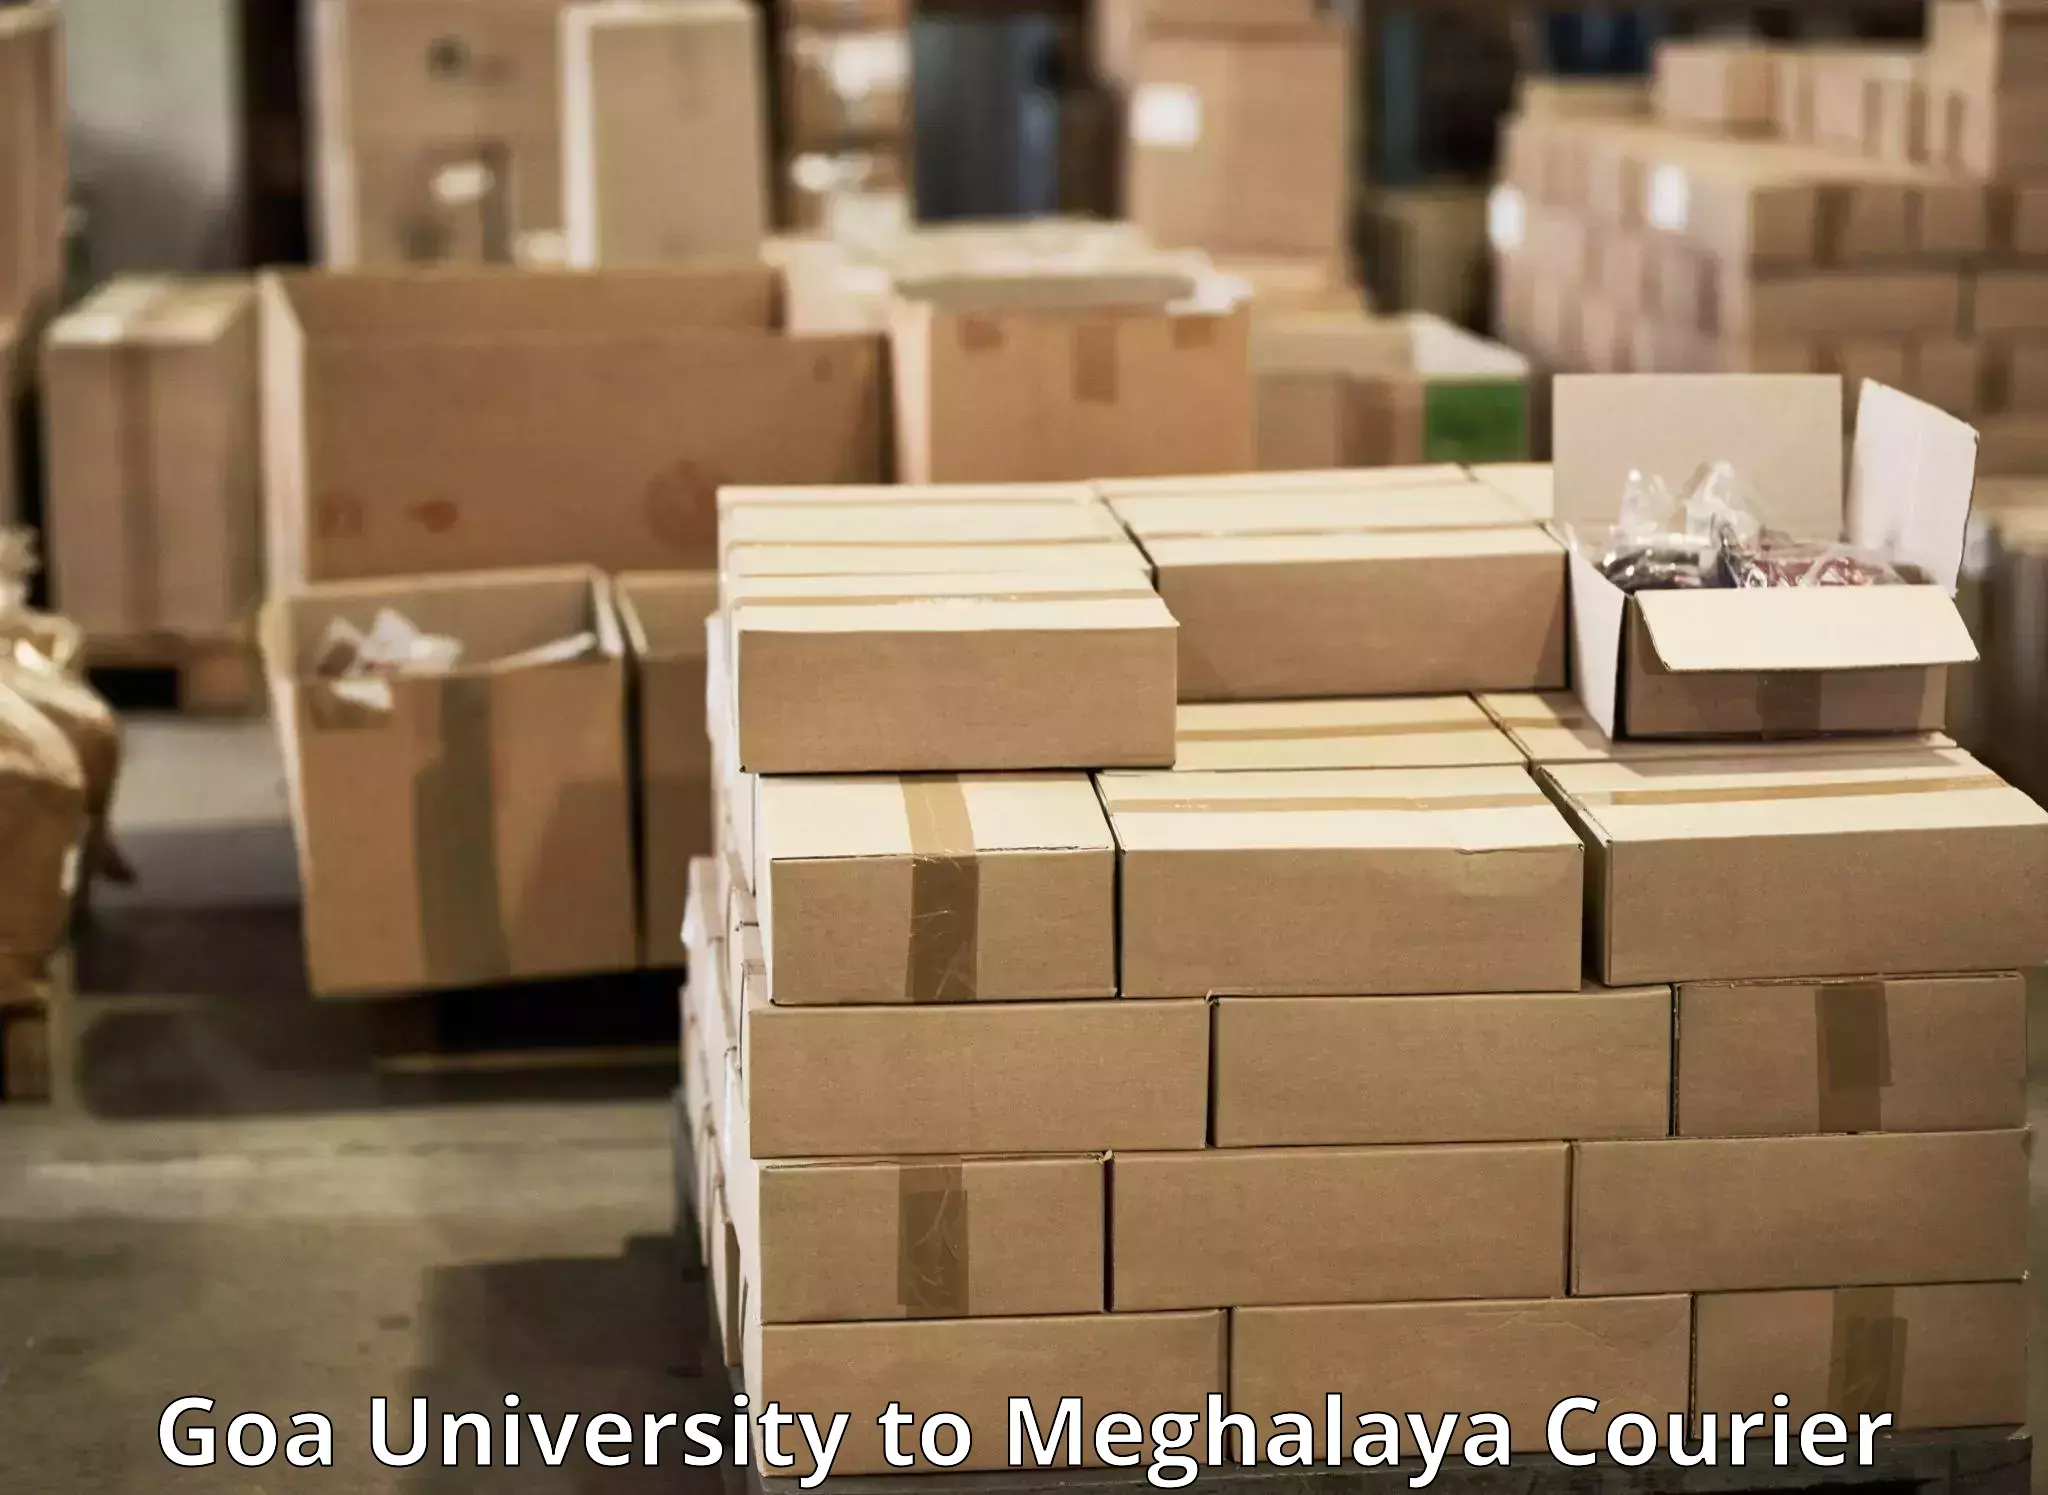 Global courier networks in Goa University to Shillong